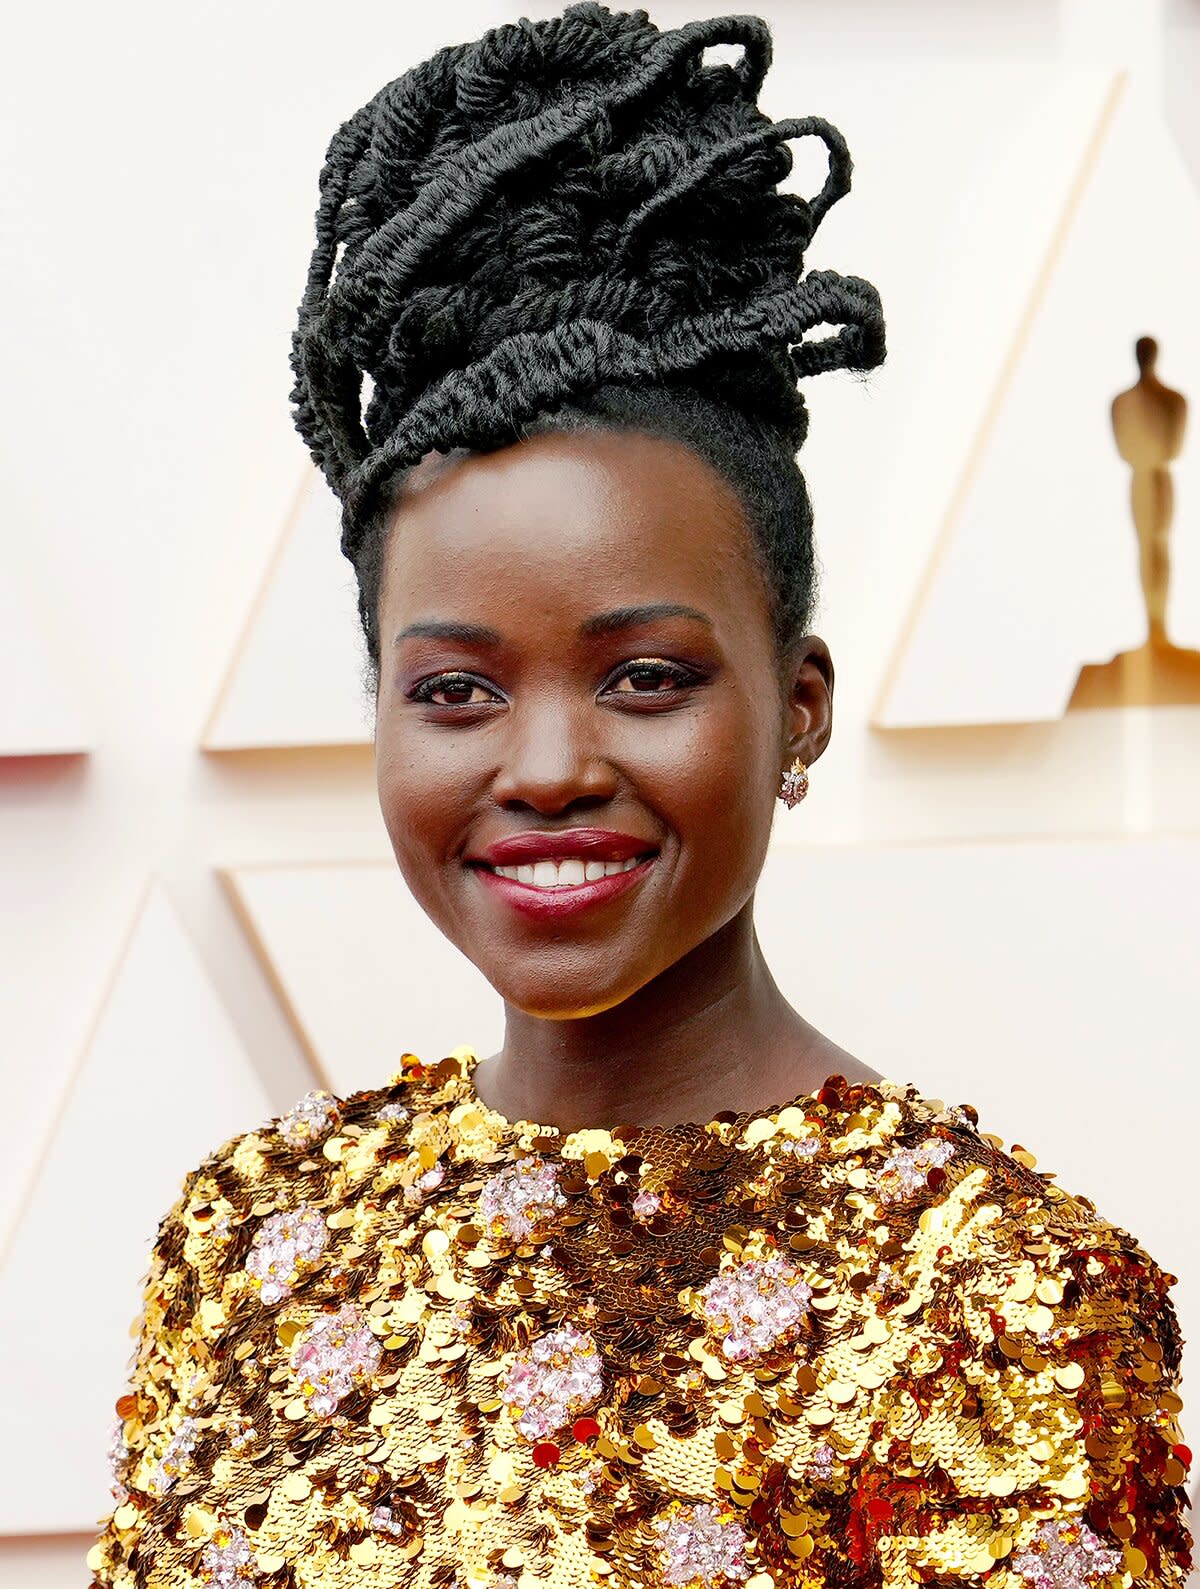 Lupita Nyong'o attends the 94th Annual Academy Awards at Hollywood and Highland on March 27, 2022 in Hollywood, California.